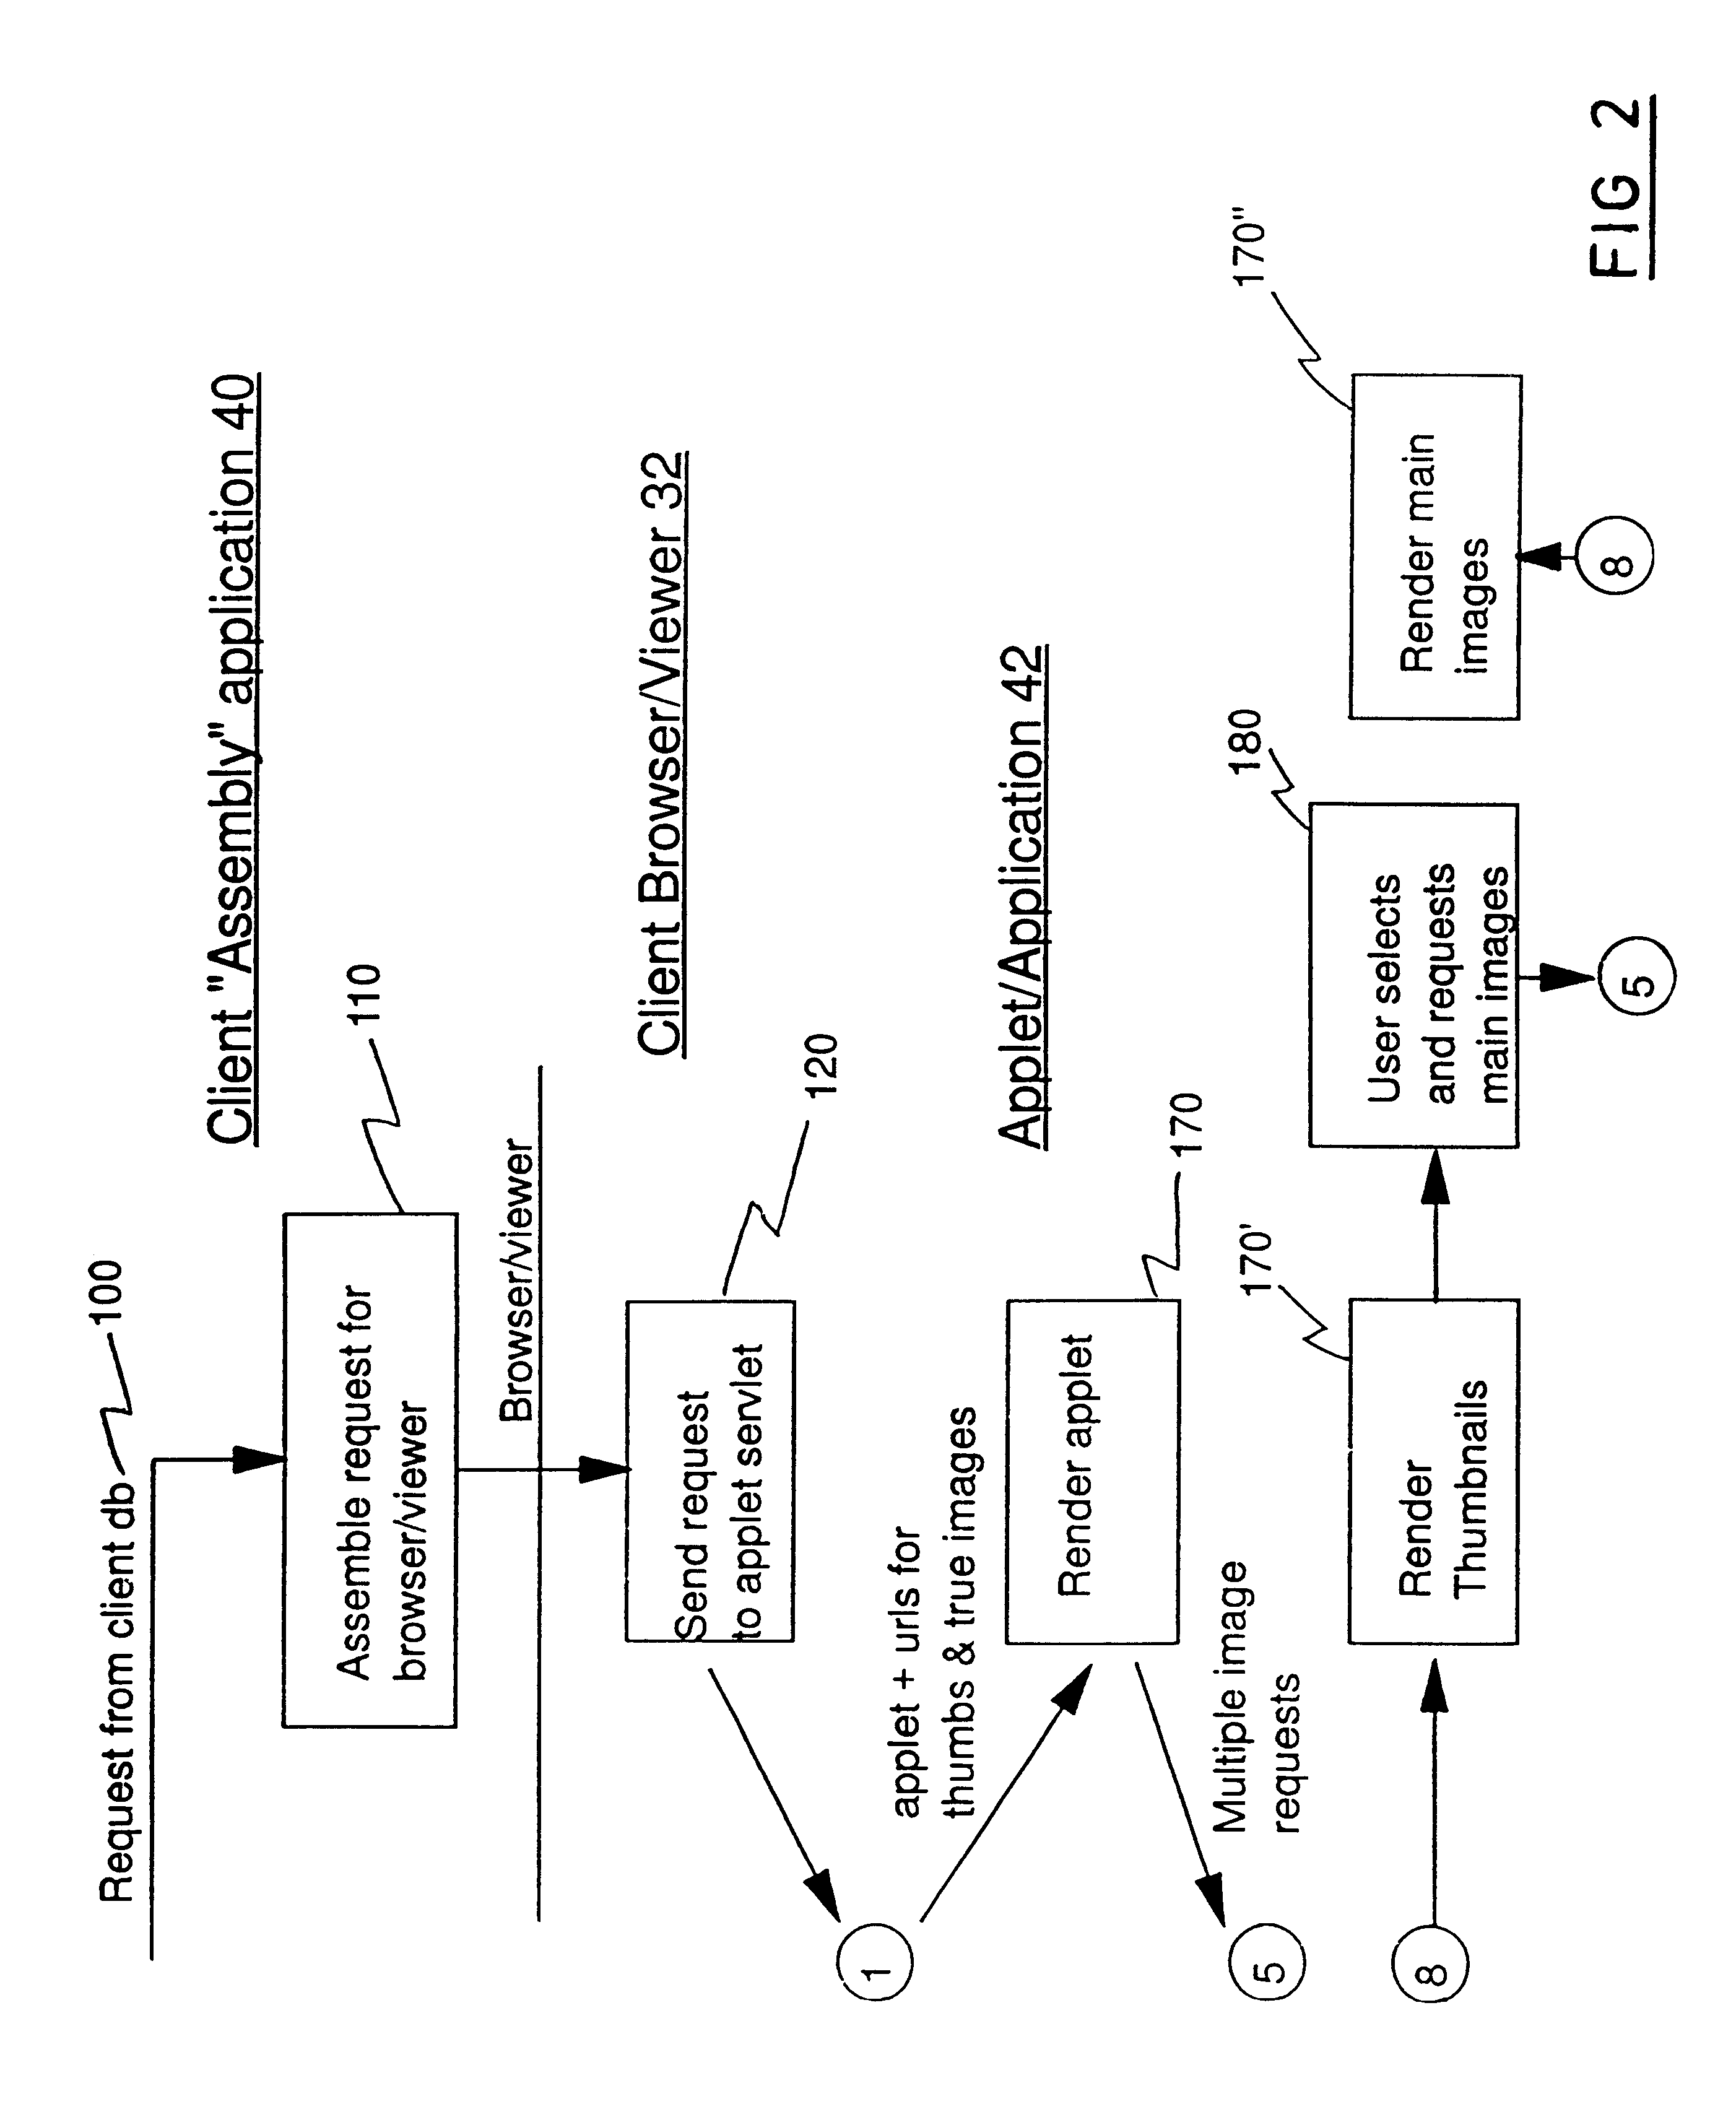 Handling processor-intensive operations in a data processing system